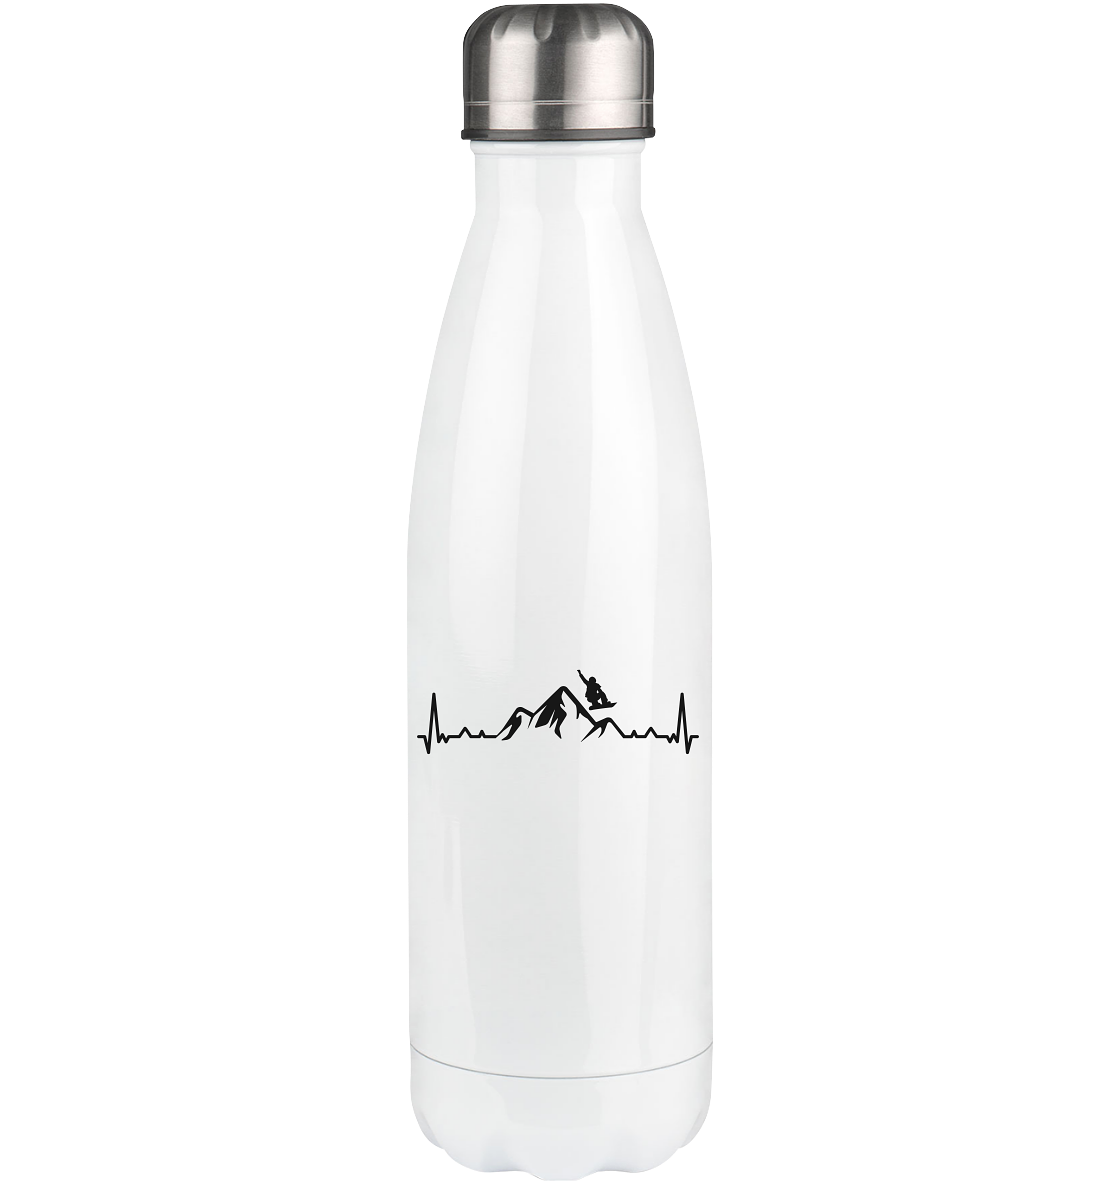 Heartbeat Mountain and Snowboarding - Edelstahl Thermosflasche snowboarden 500ml